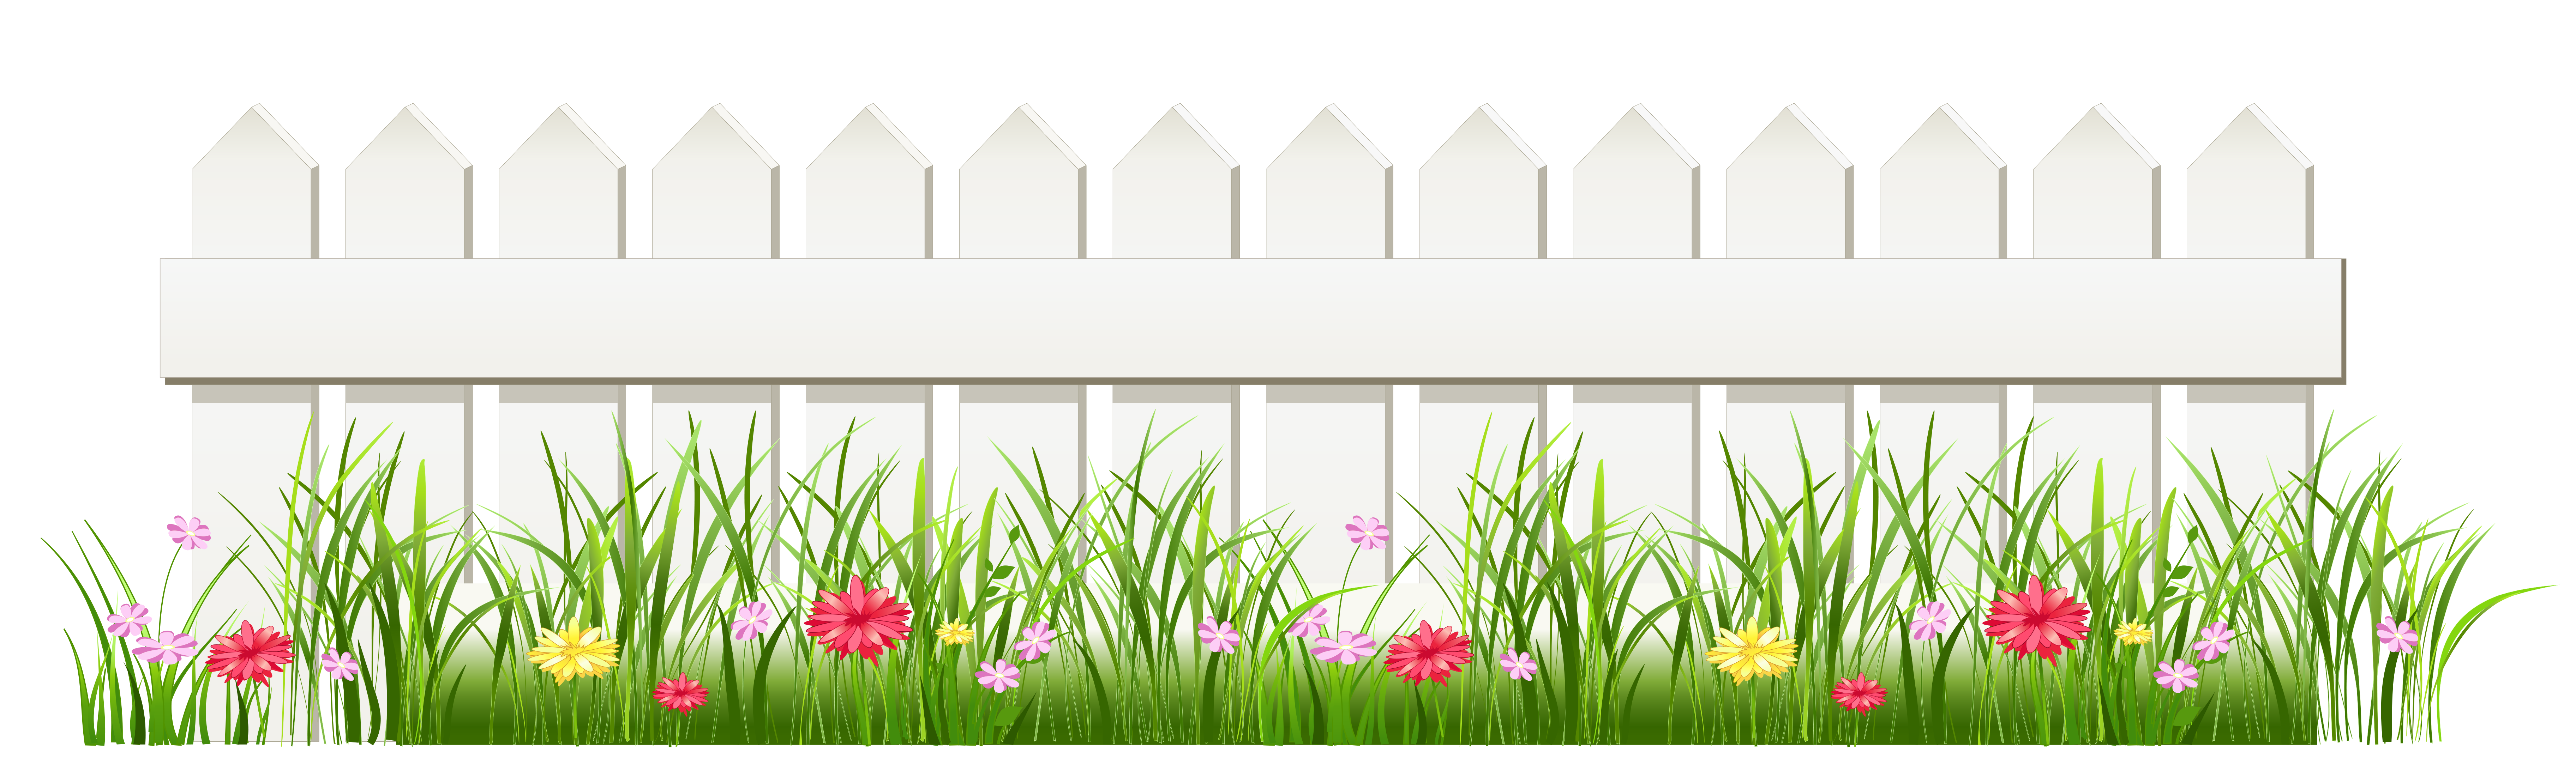 Transparent white with grass. Clipart rock fence